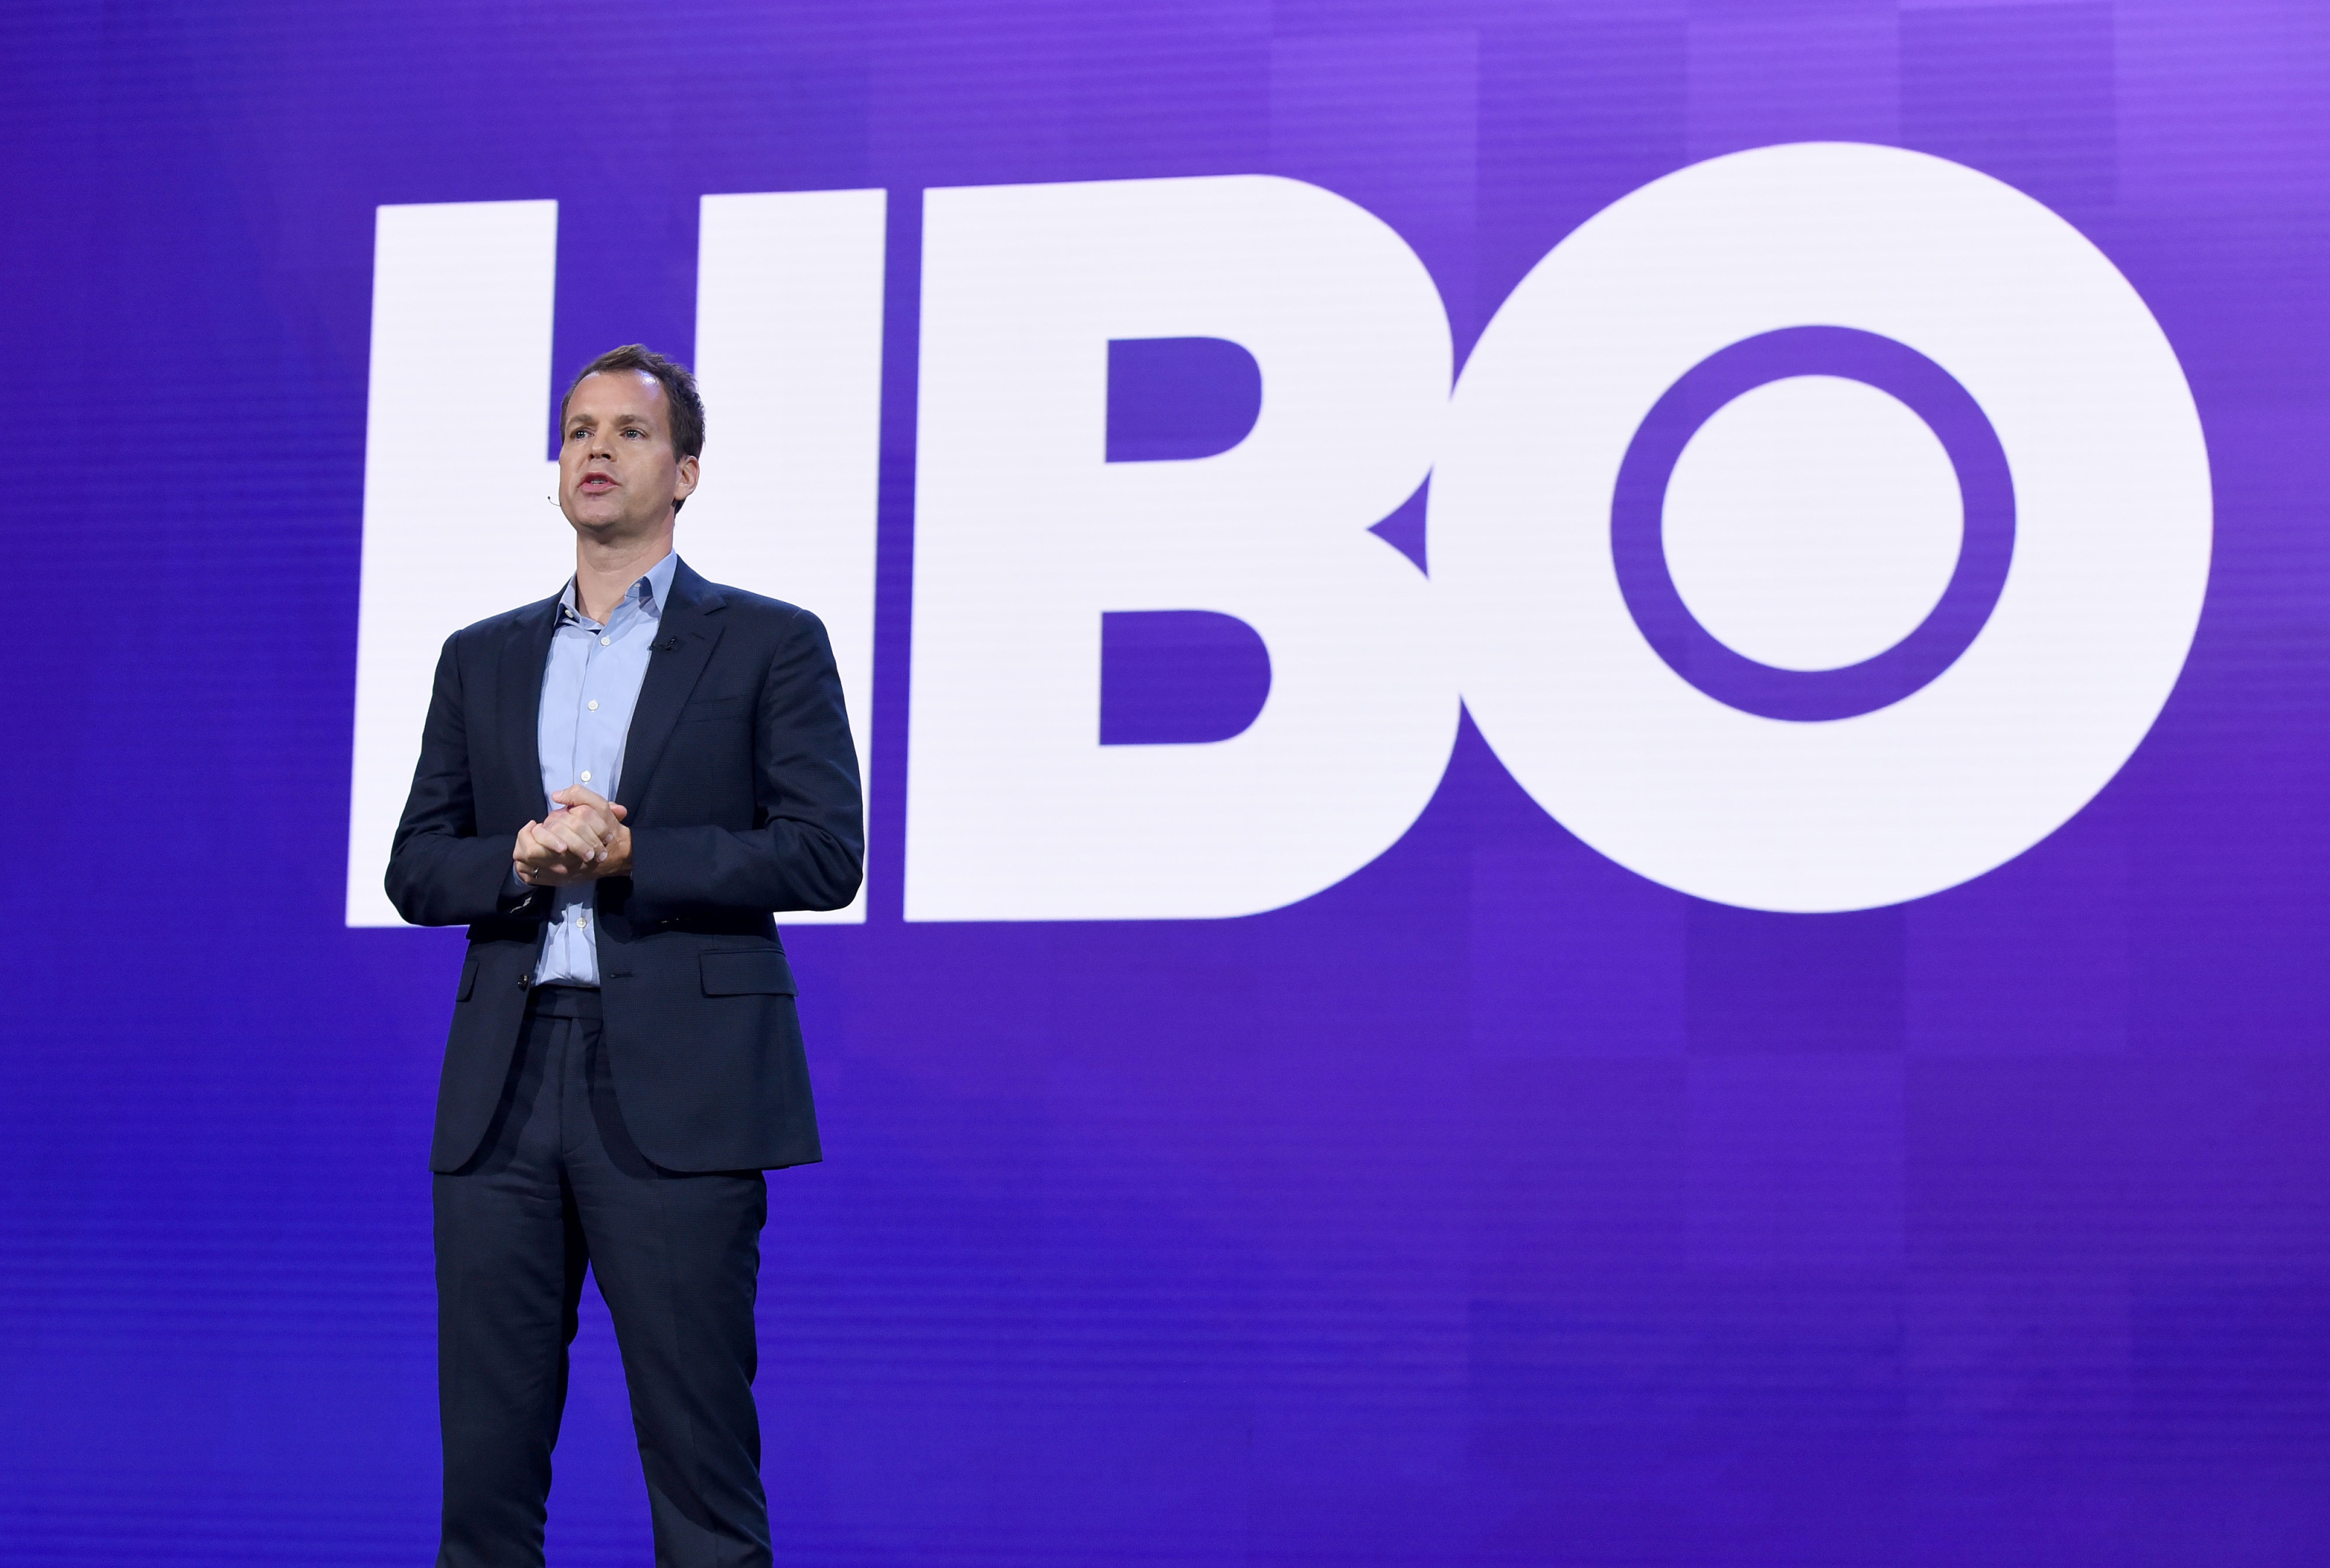 HBO Max Chief Officer Casey Bloys